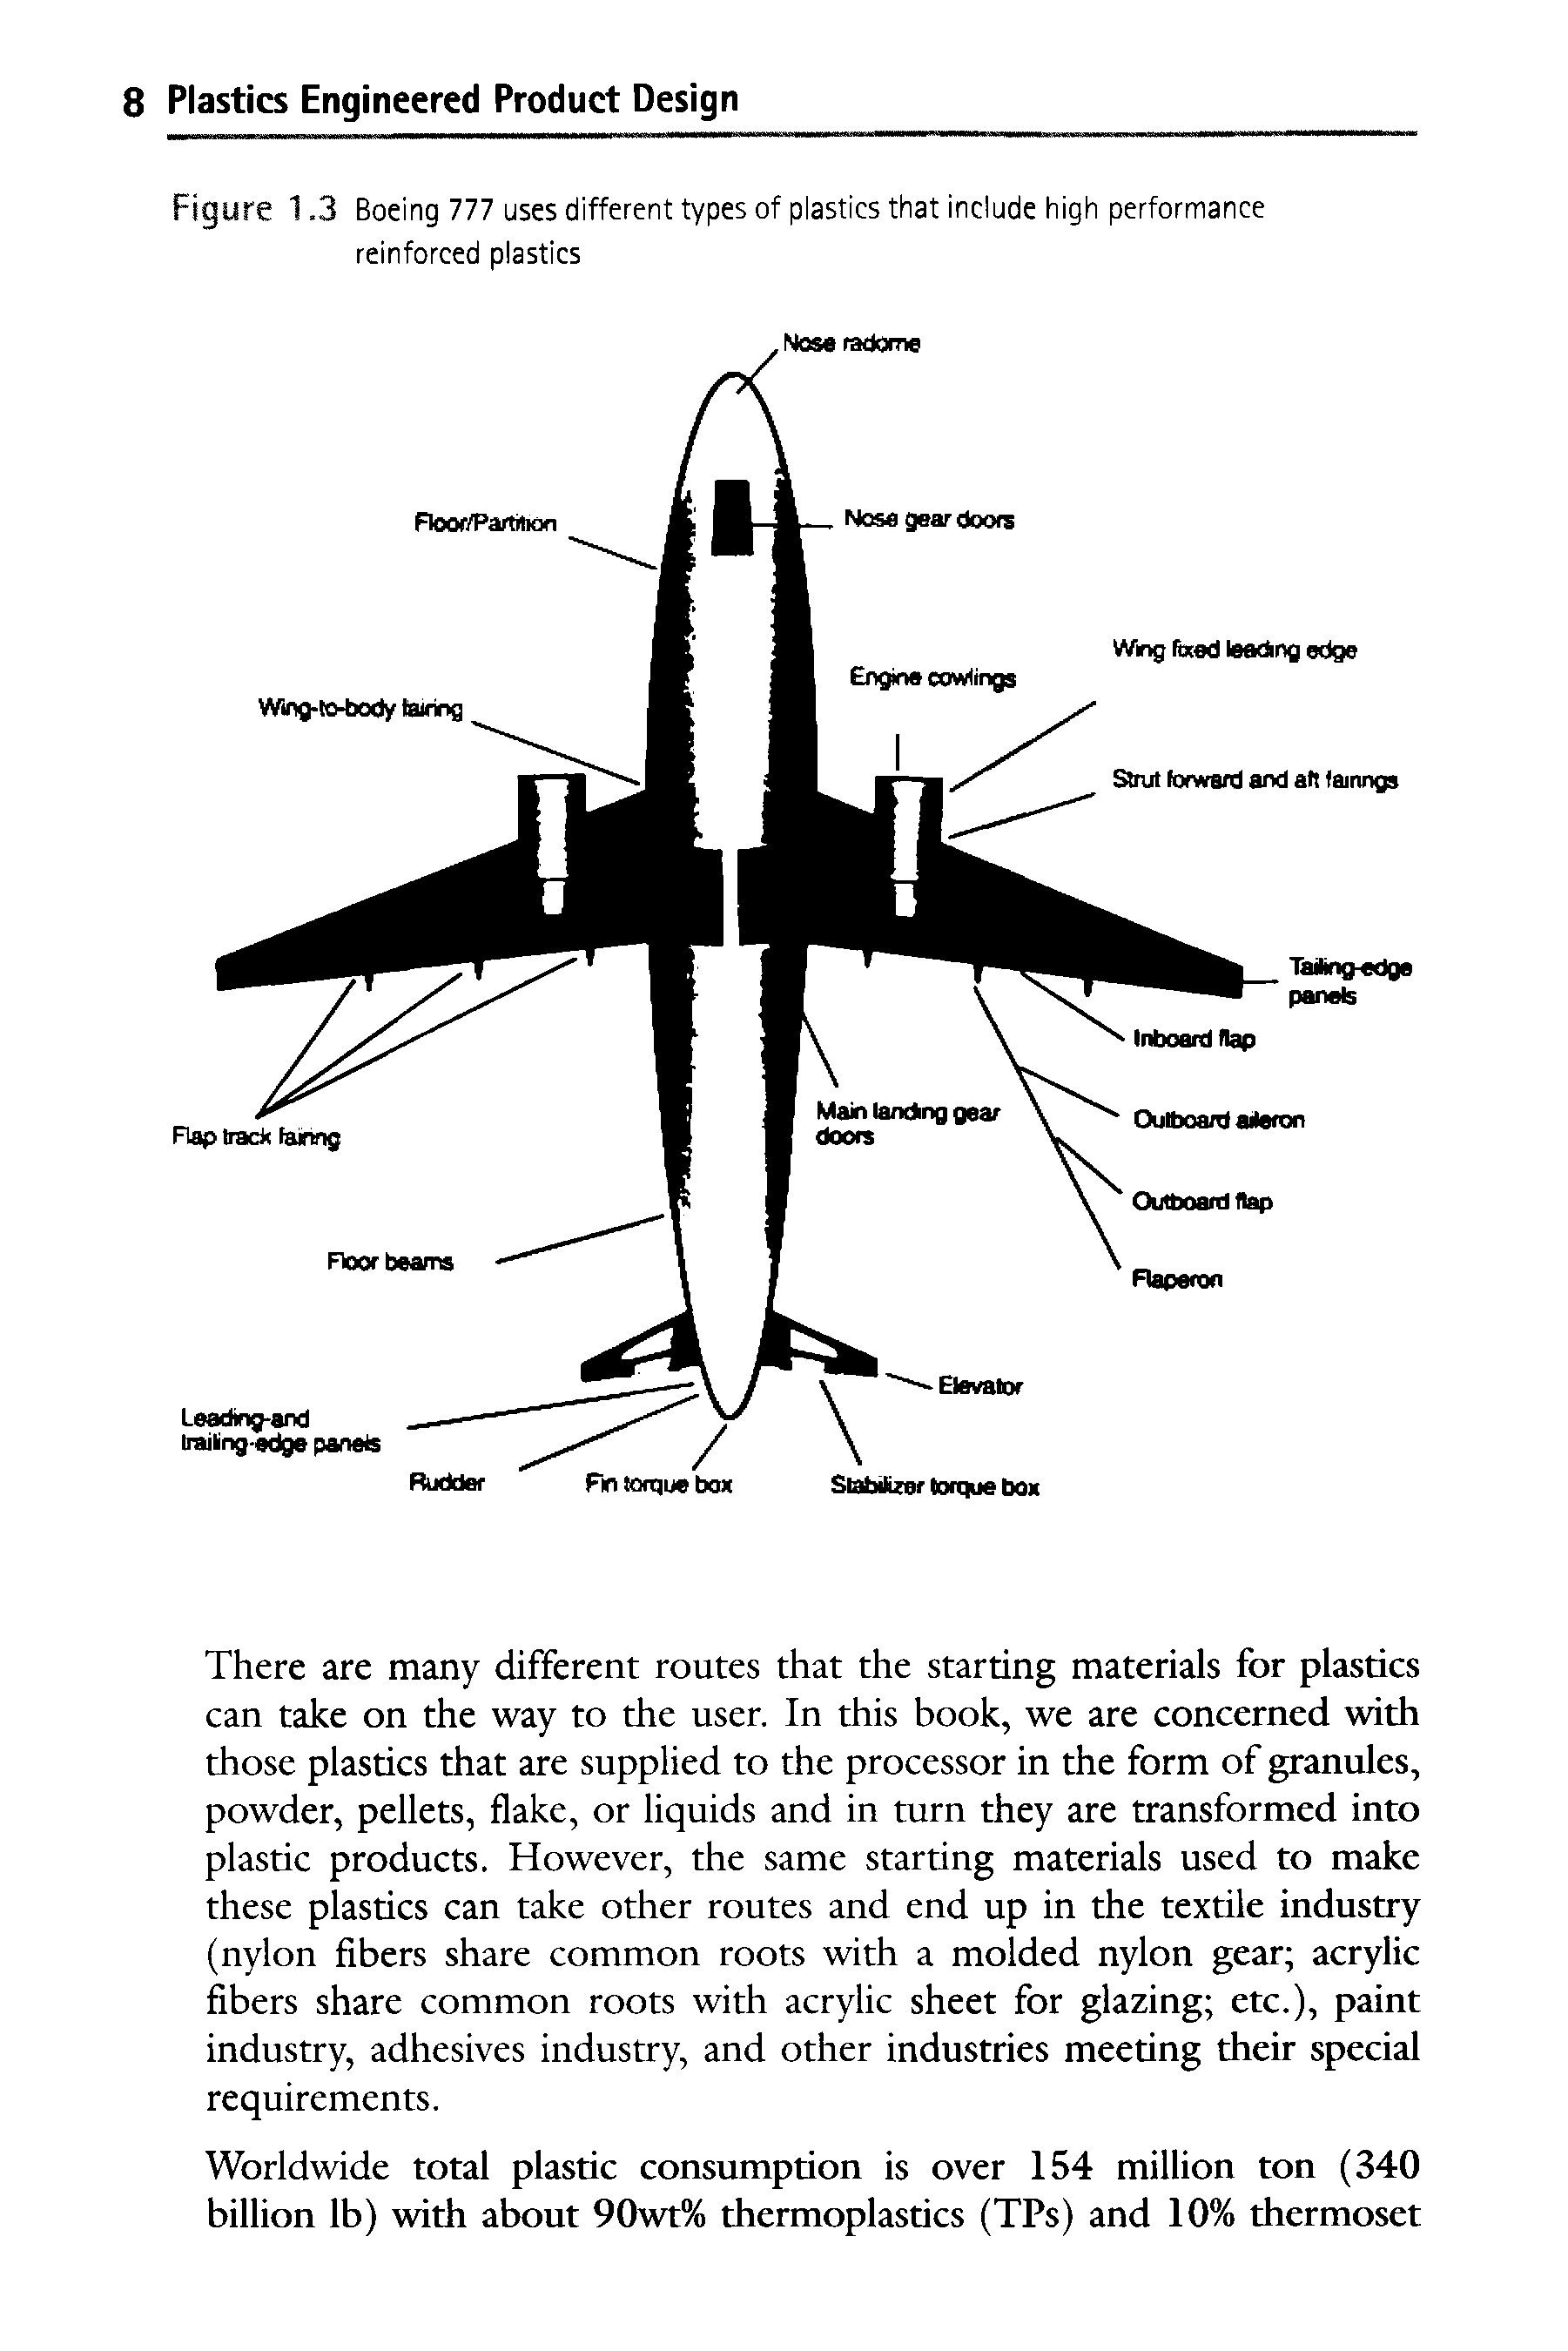 Figure 1.3 Boeing 777 uses different types of plastics that include high performance reinforced plastics...